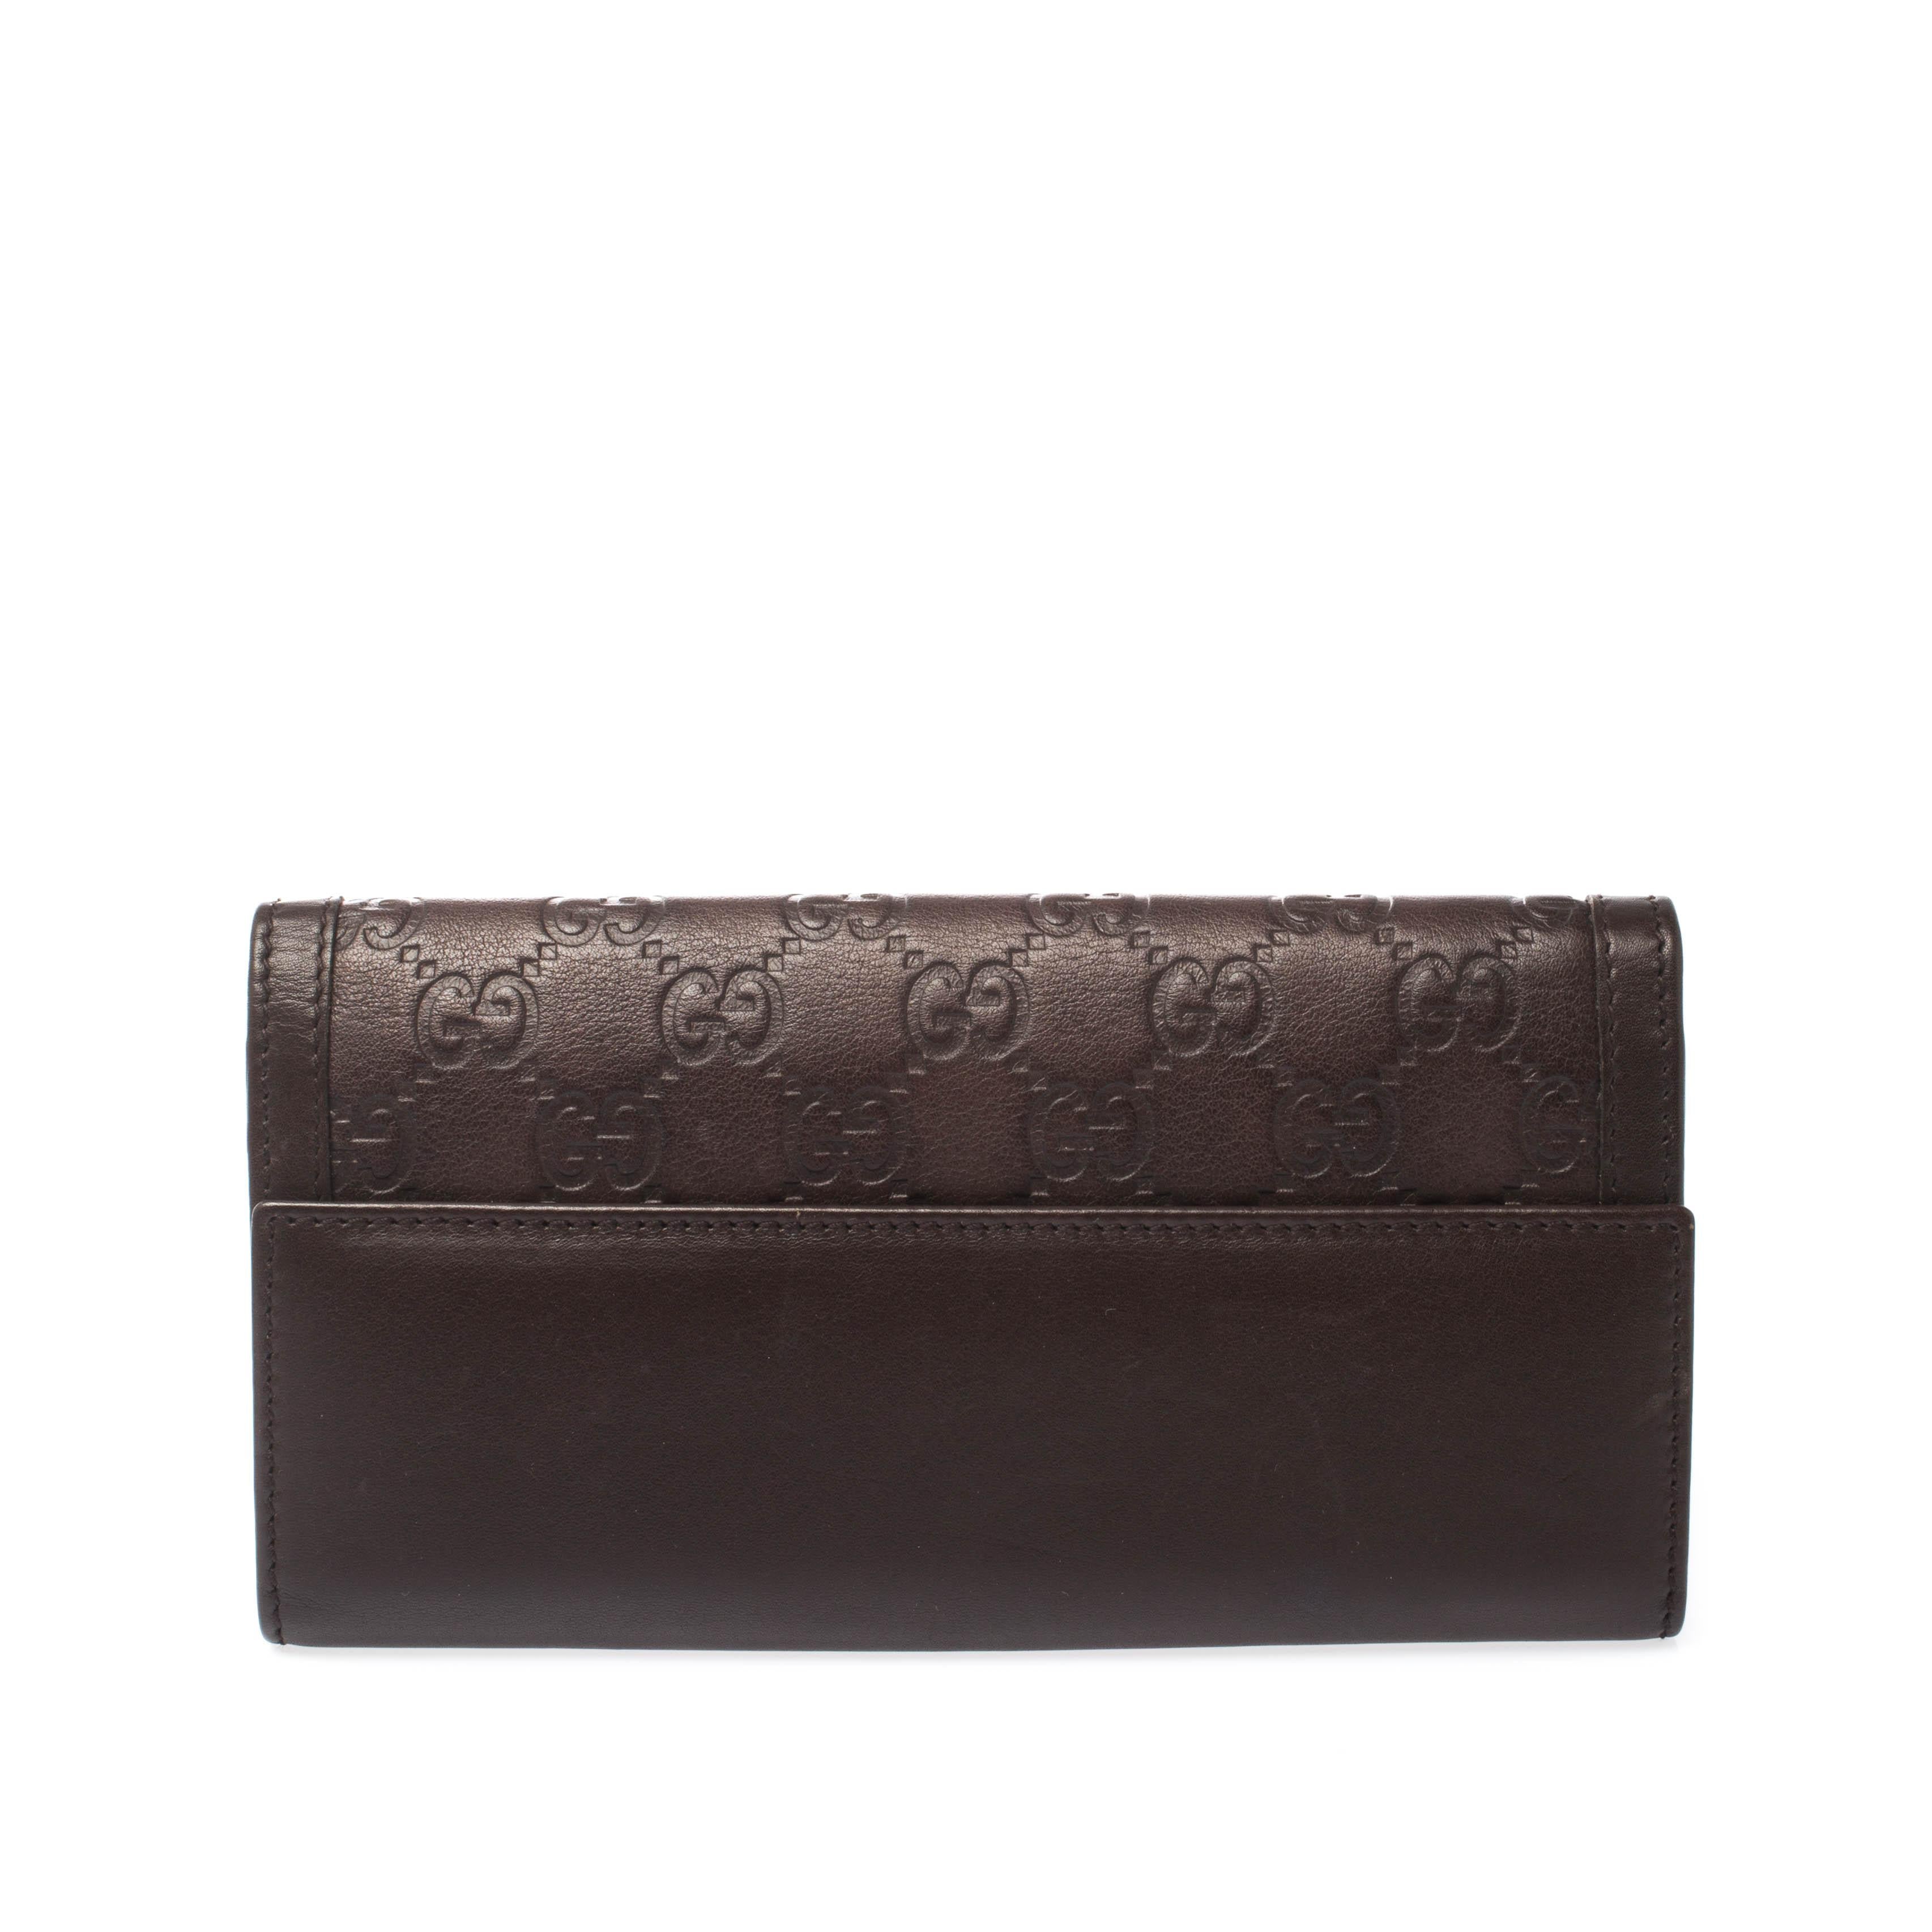 Showcasing an exclusive design from Gucci, this wallet makes for a convenient accessory. Crafted from Guccissima leather this wallet flaunts the signature interlocking GG on the front and can fit in your essentials with ease.

Includes: The Luxury